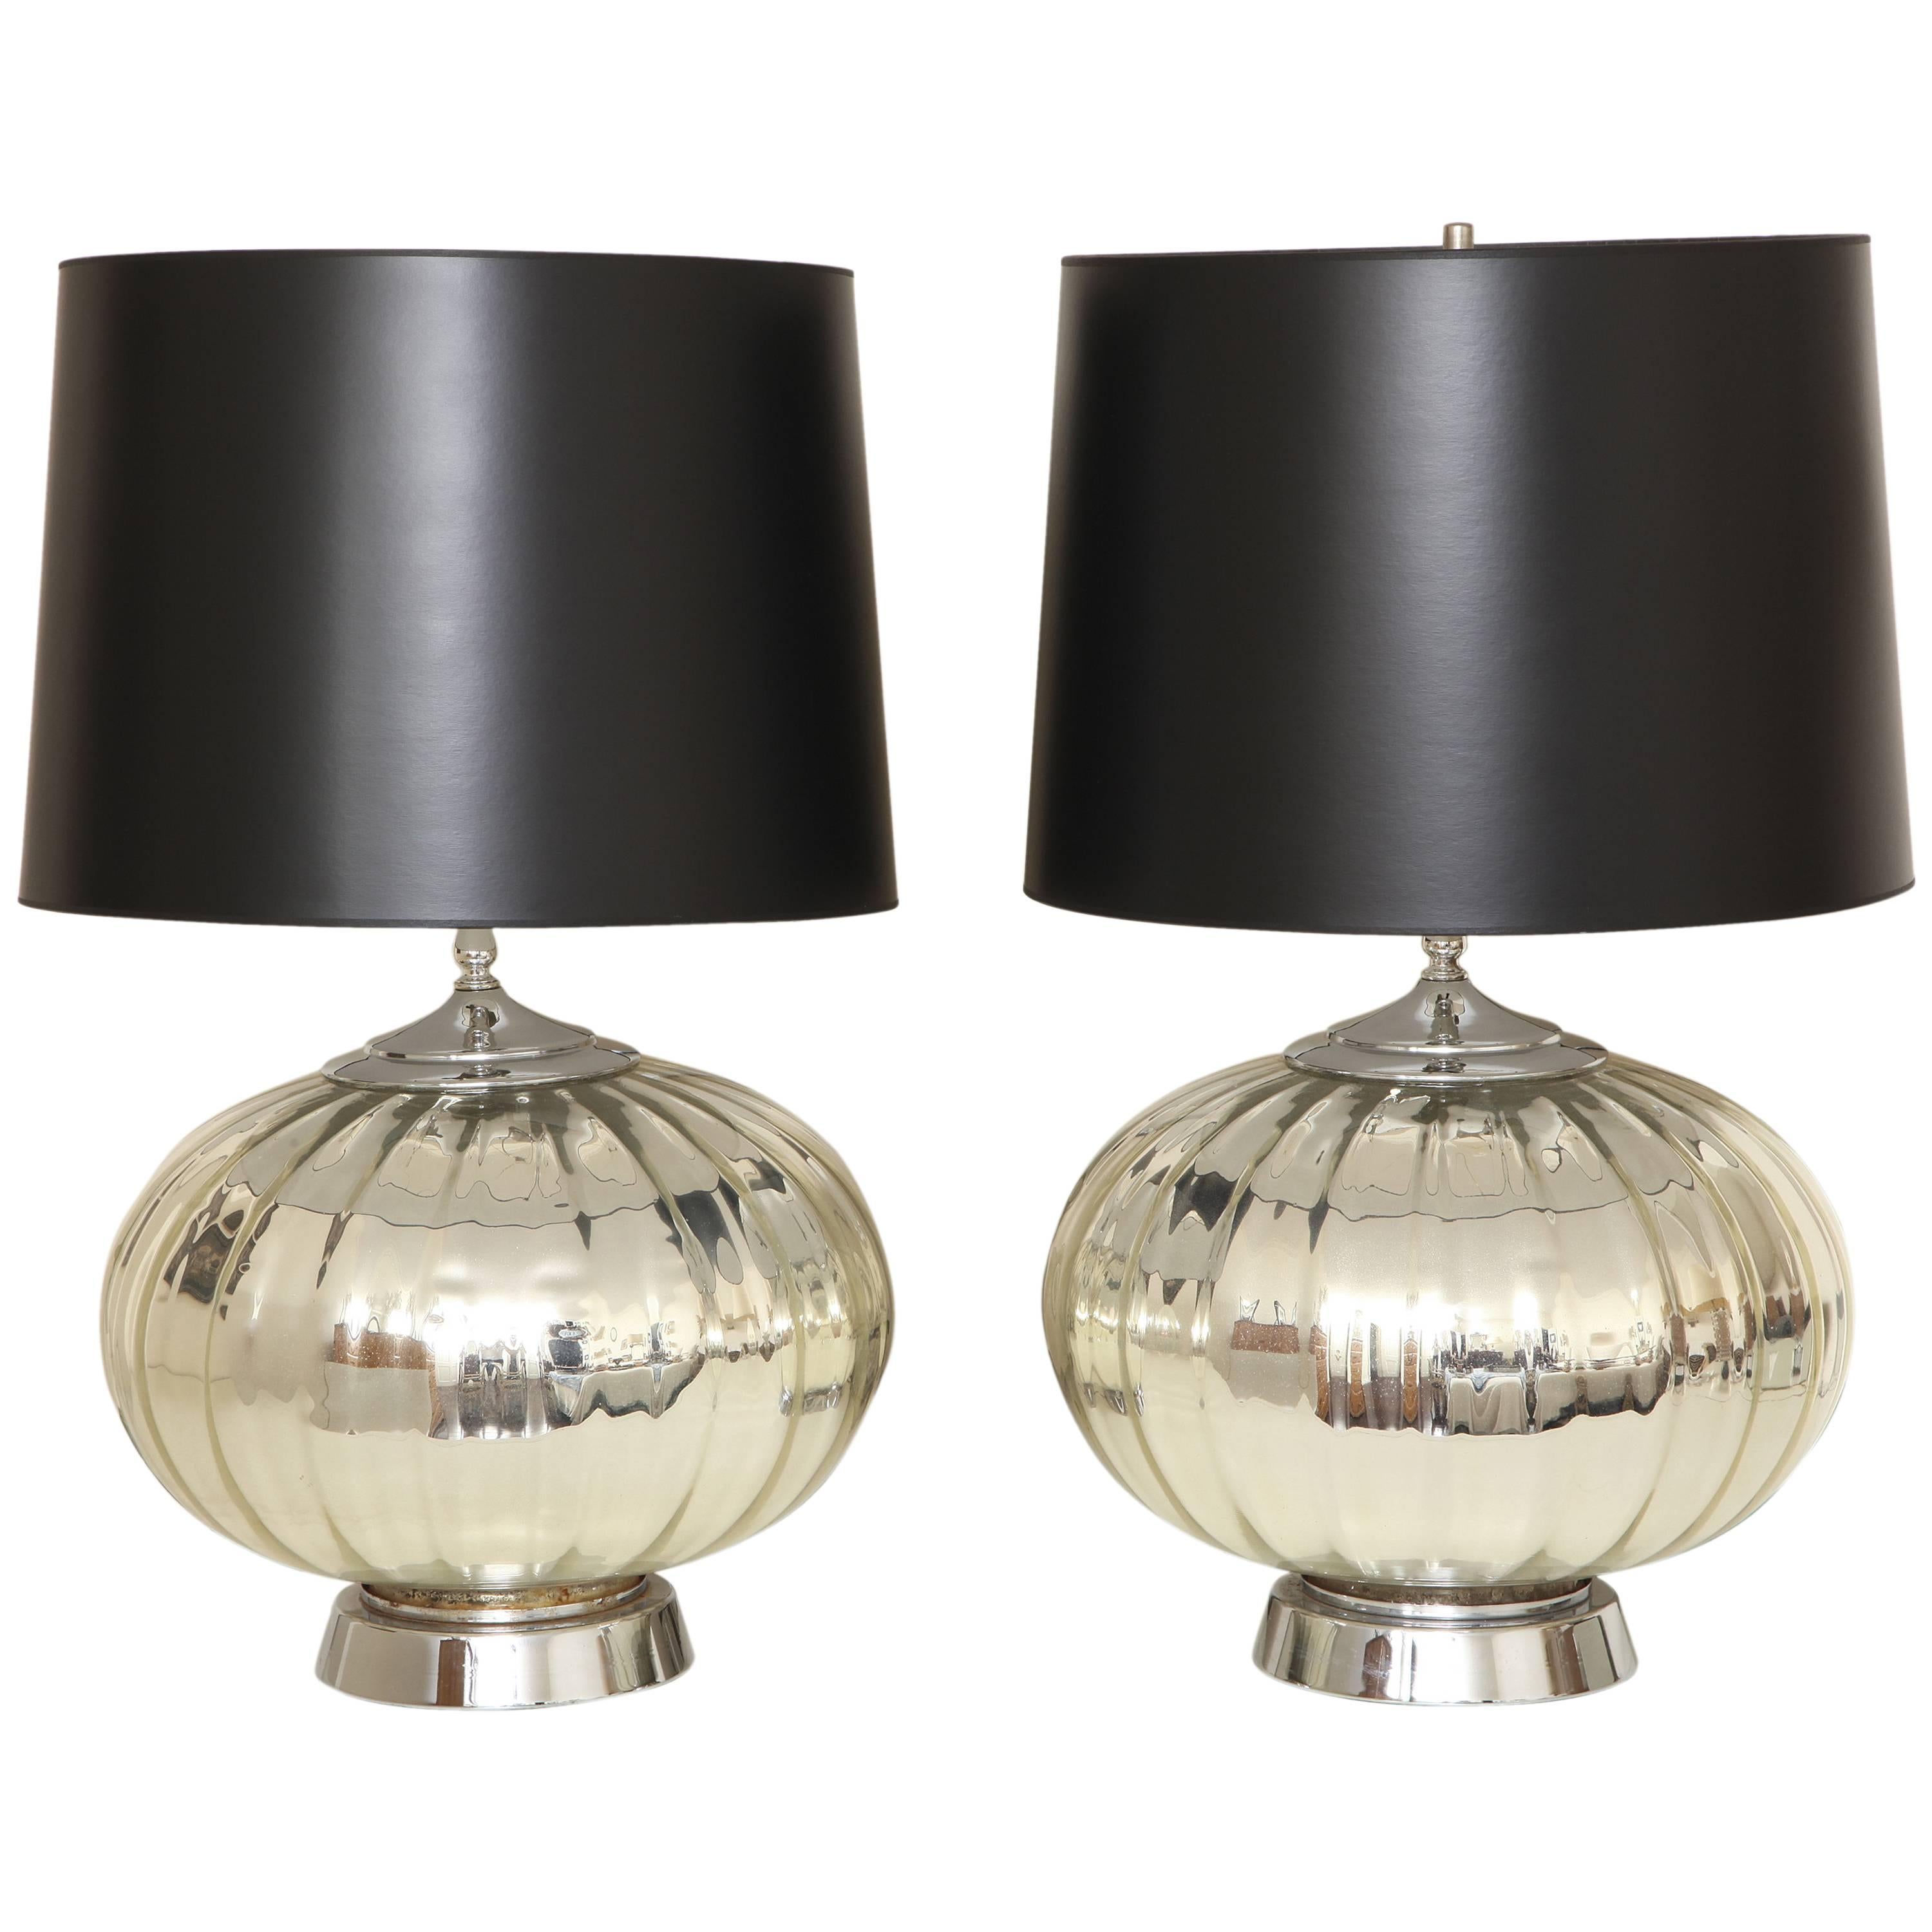  Pair of Mid century Modern Ribbed Mercury Glass Table Lamps